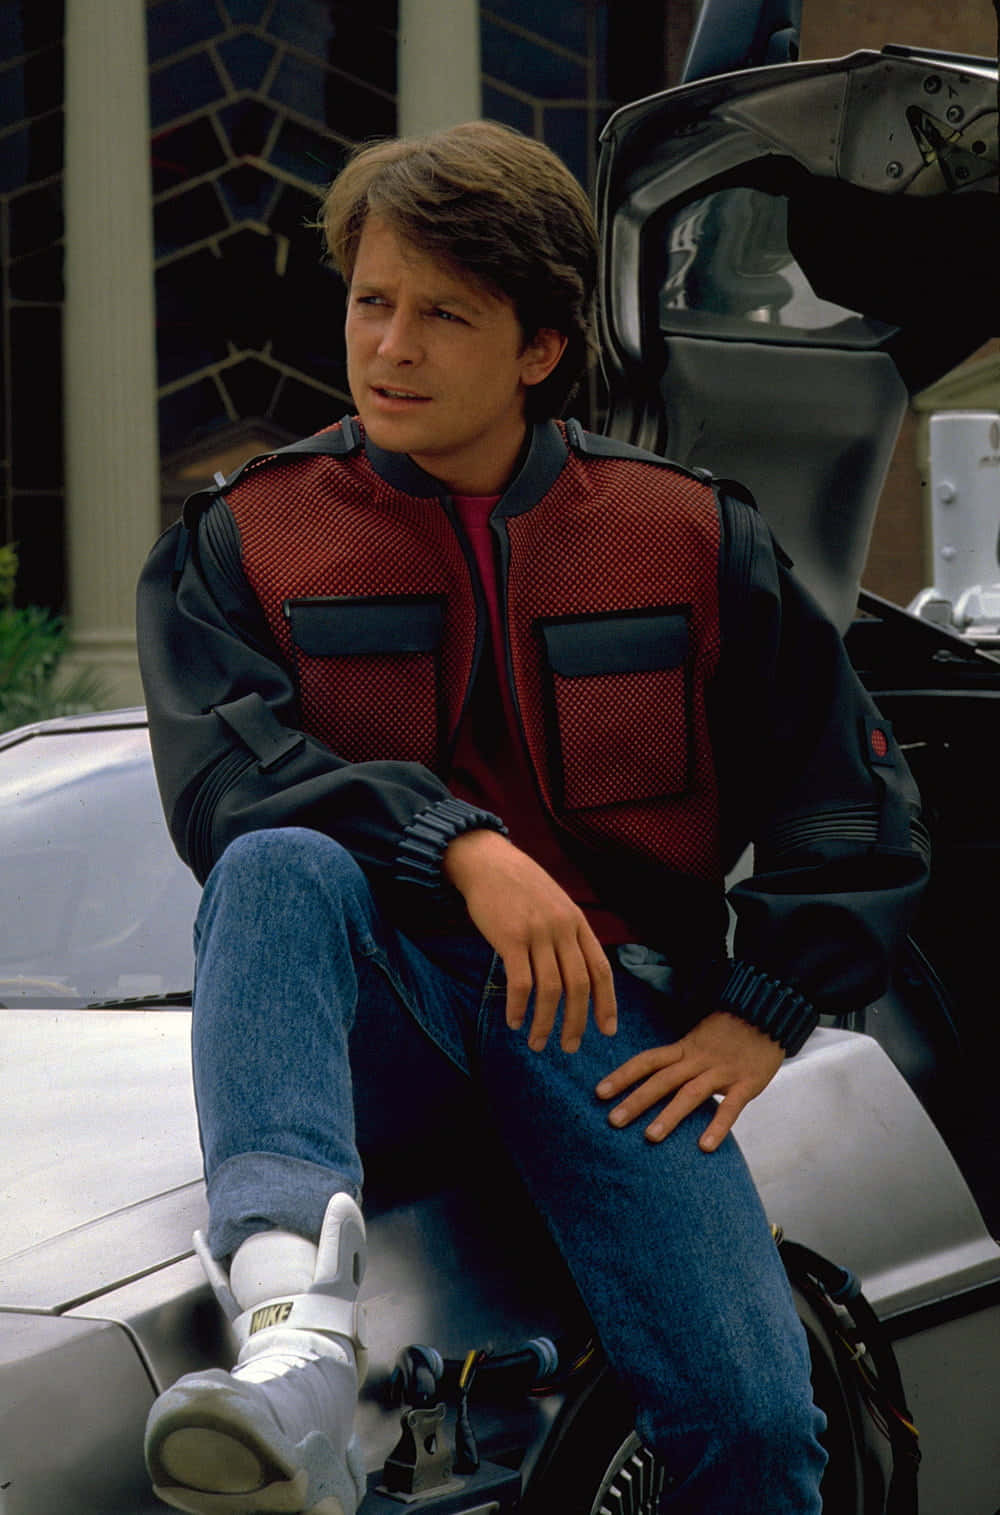 Michael J. Fox - Actor, author, and Parkinson's disease advocate for over 25 years' Wallpaper